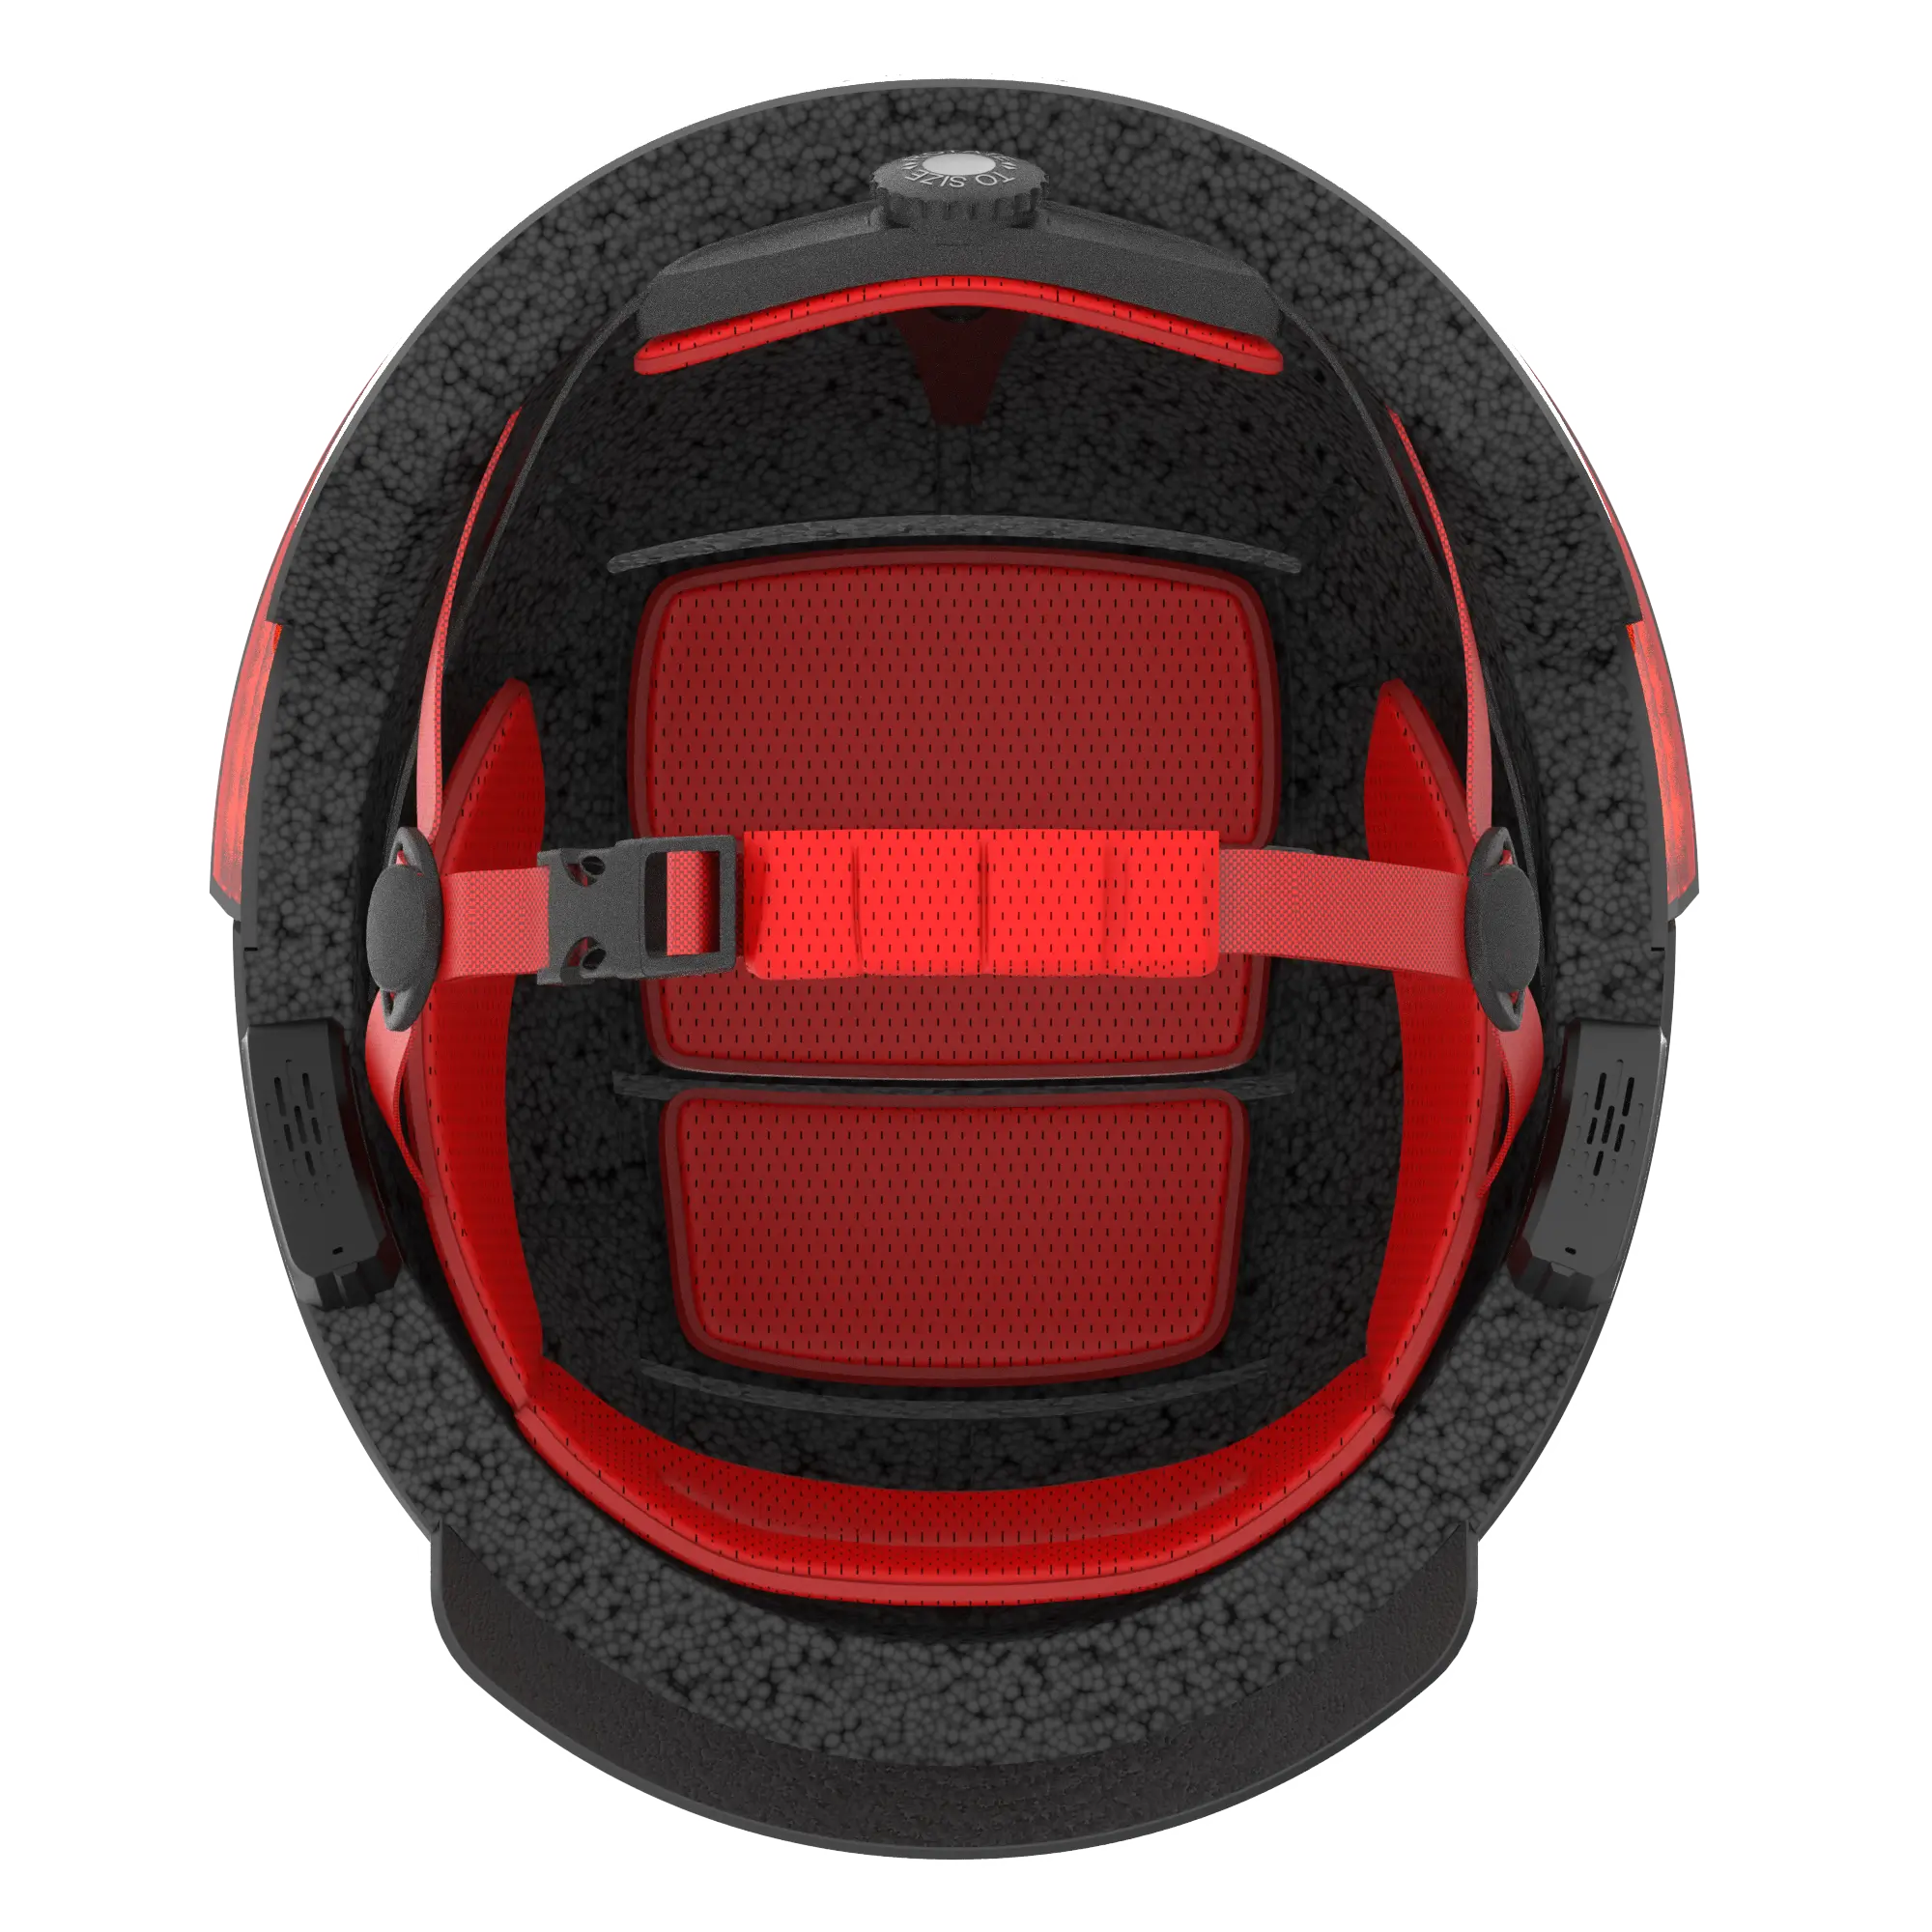 LIVALL Smart Helmet with JBL Sound for a Safe and Enjoyable Ride3